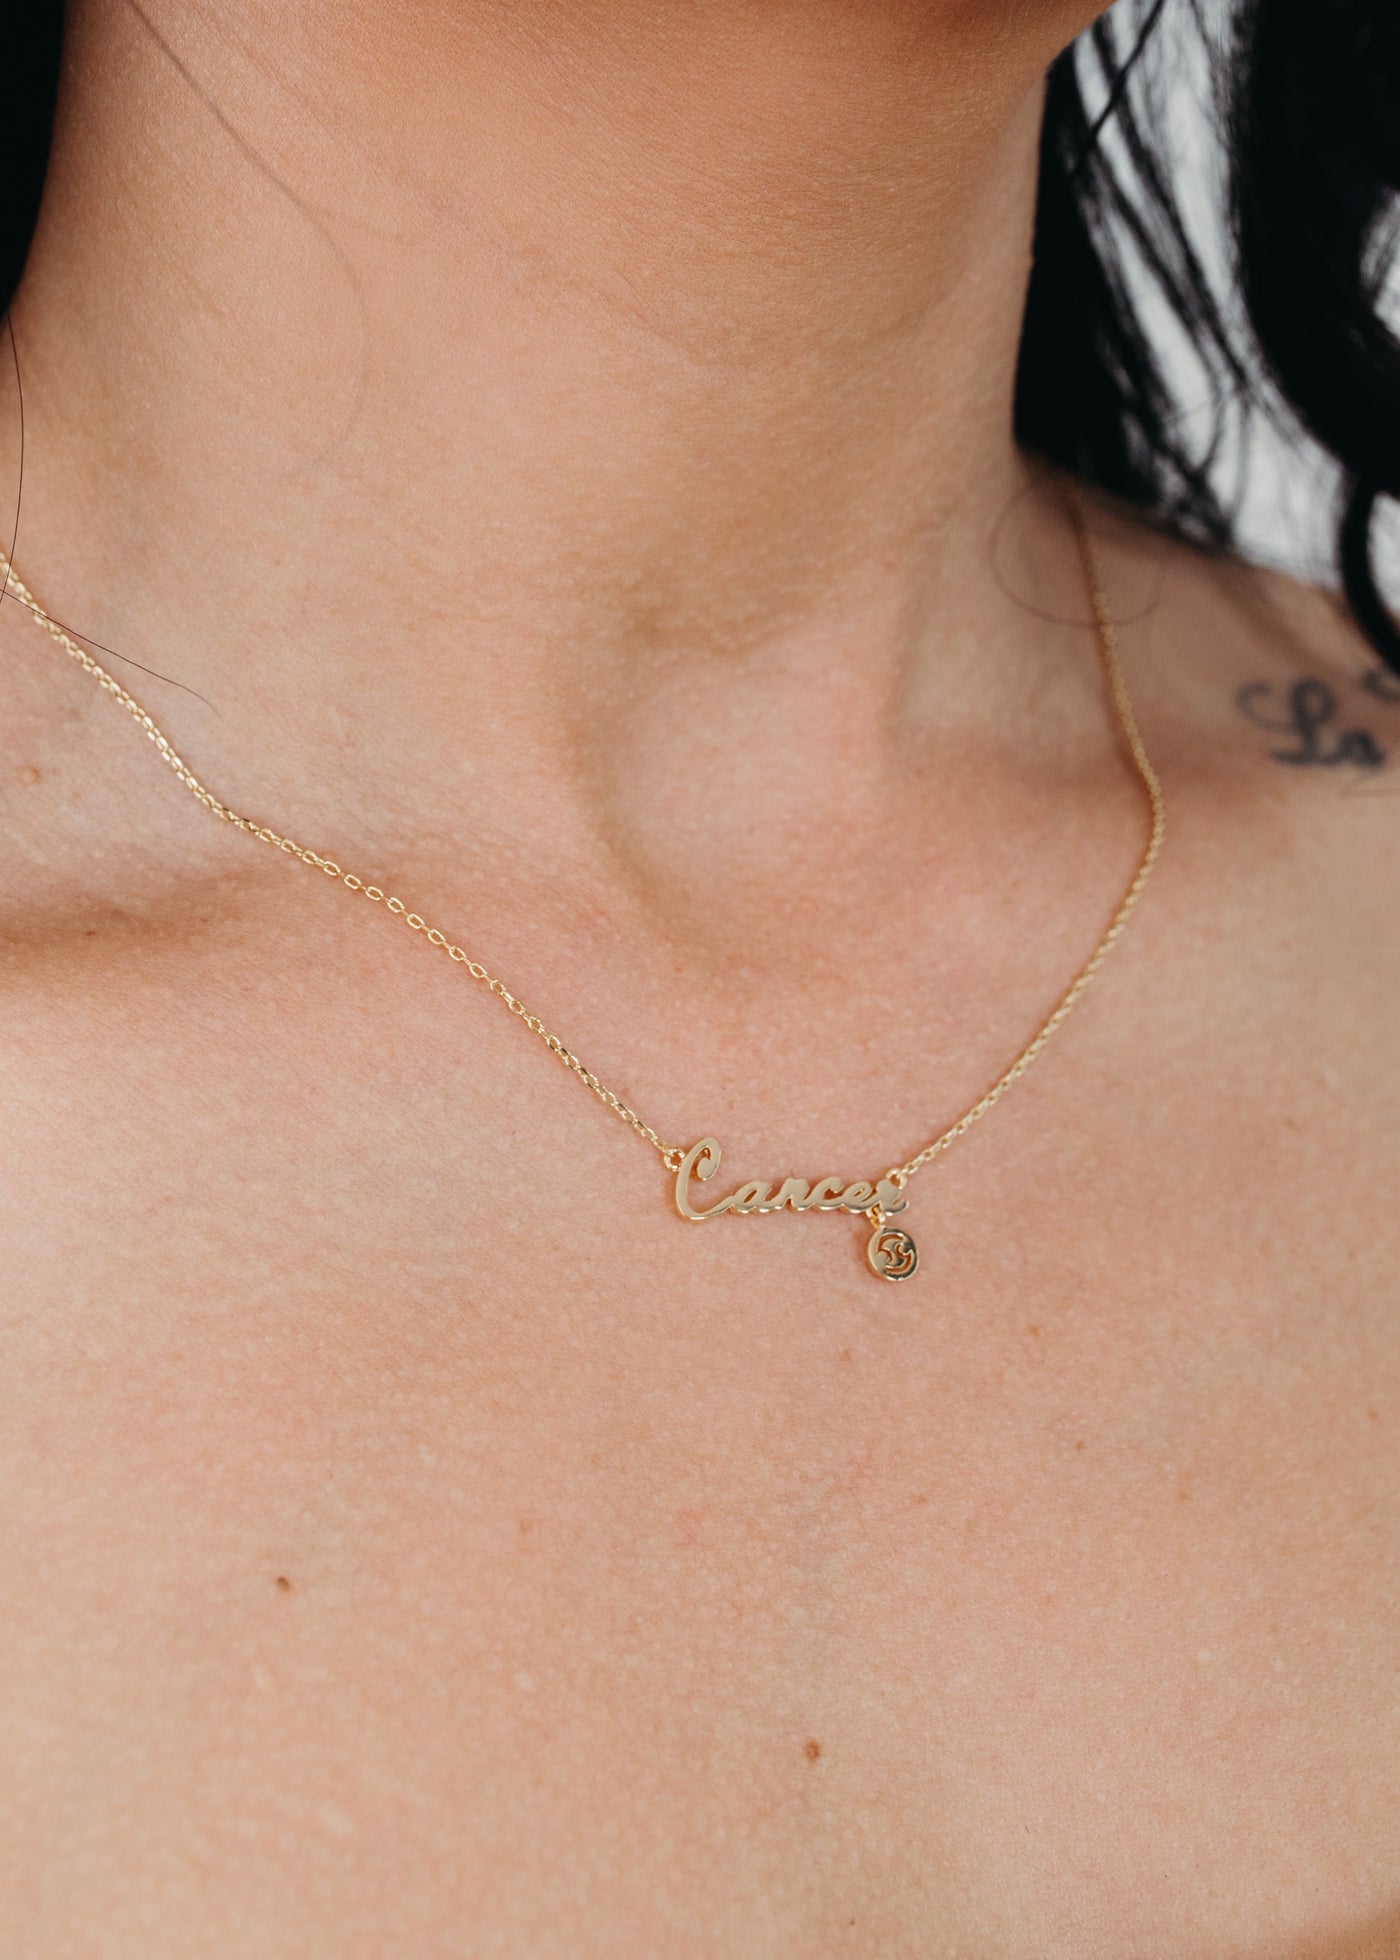 Made For Each Other - Horoscope Necklace